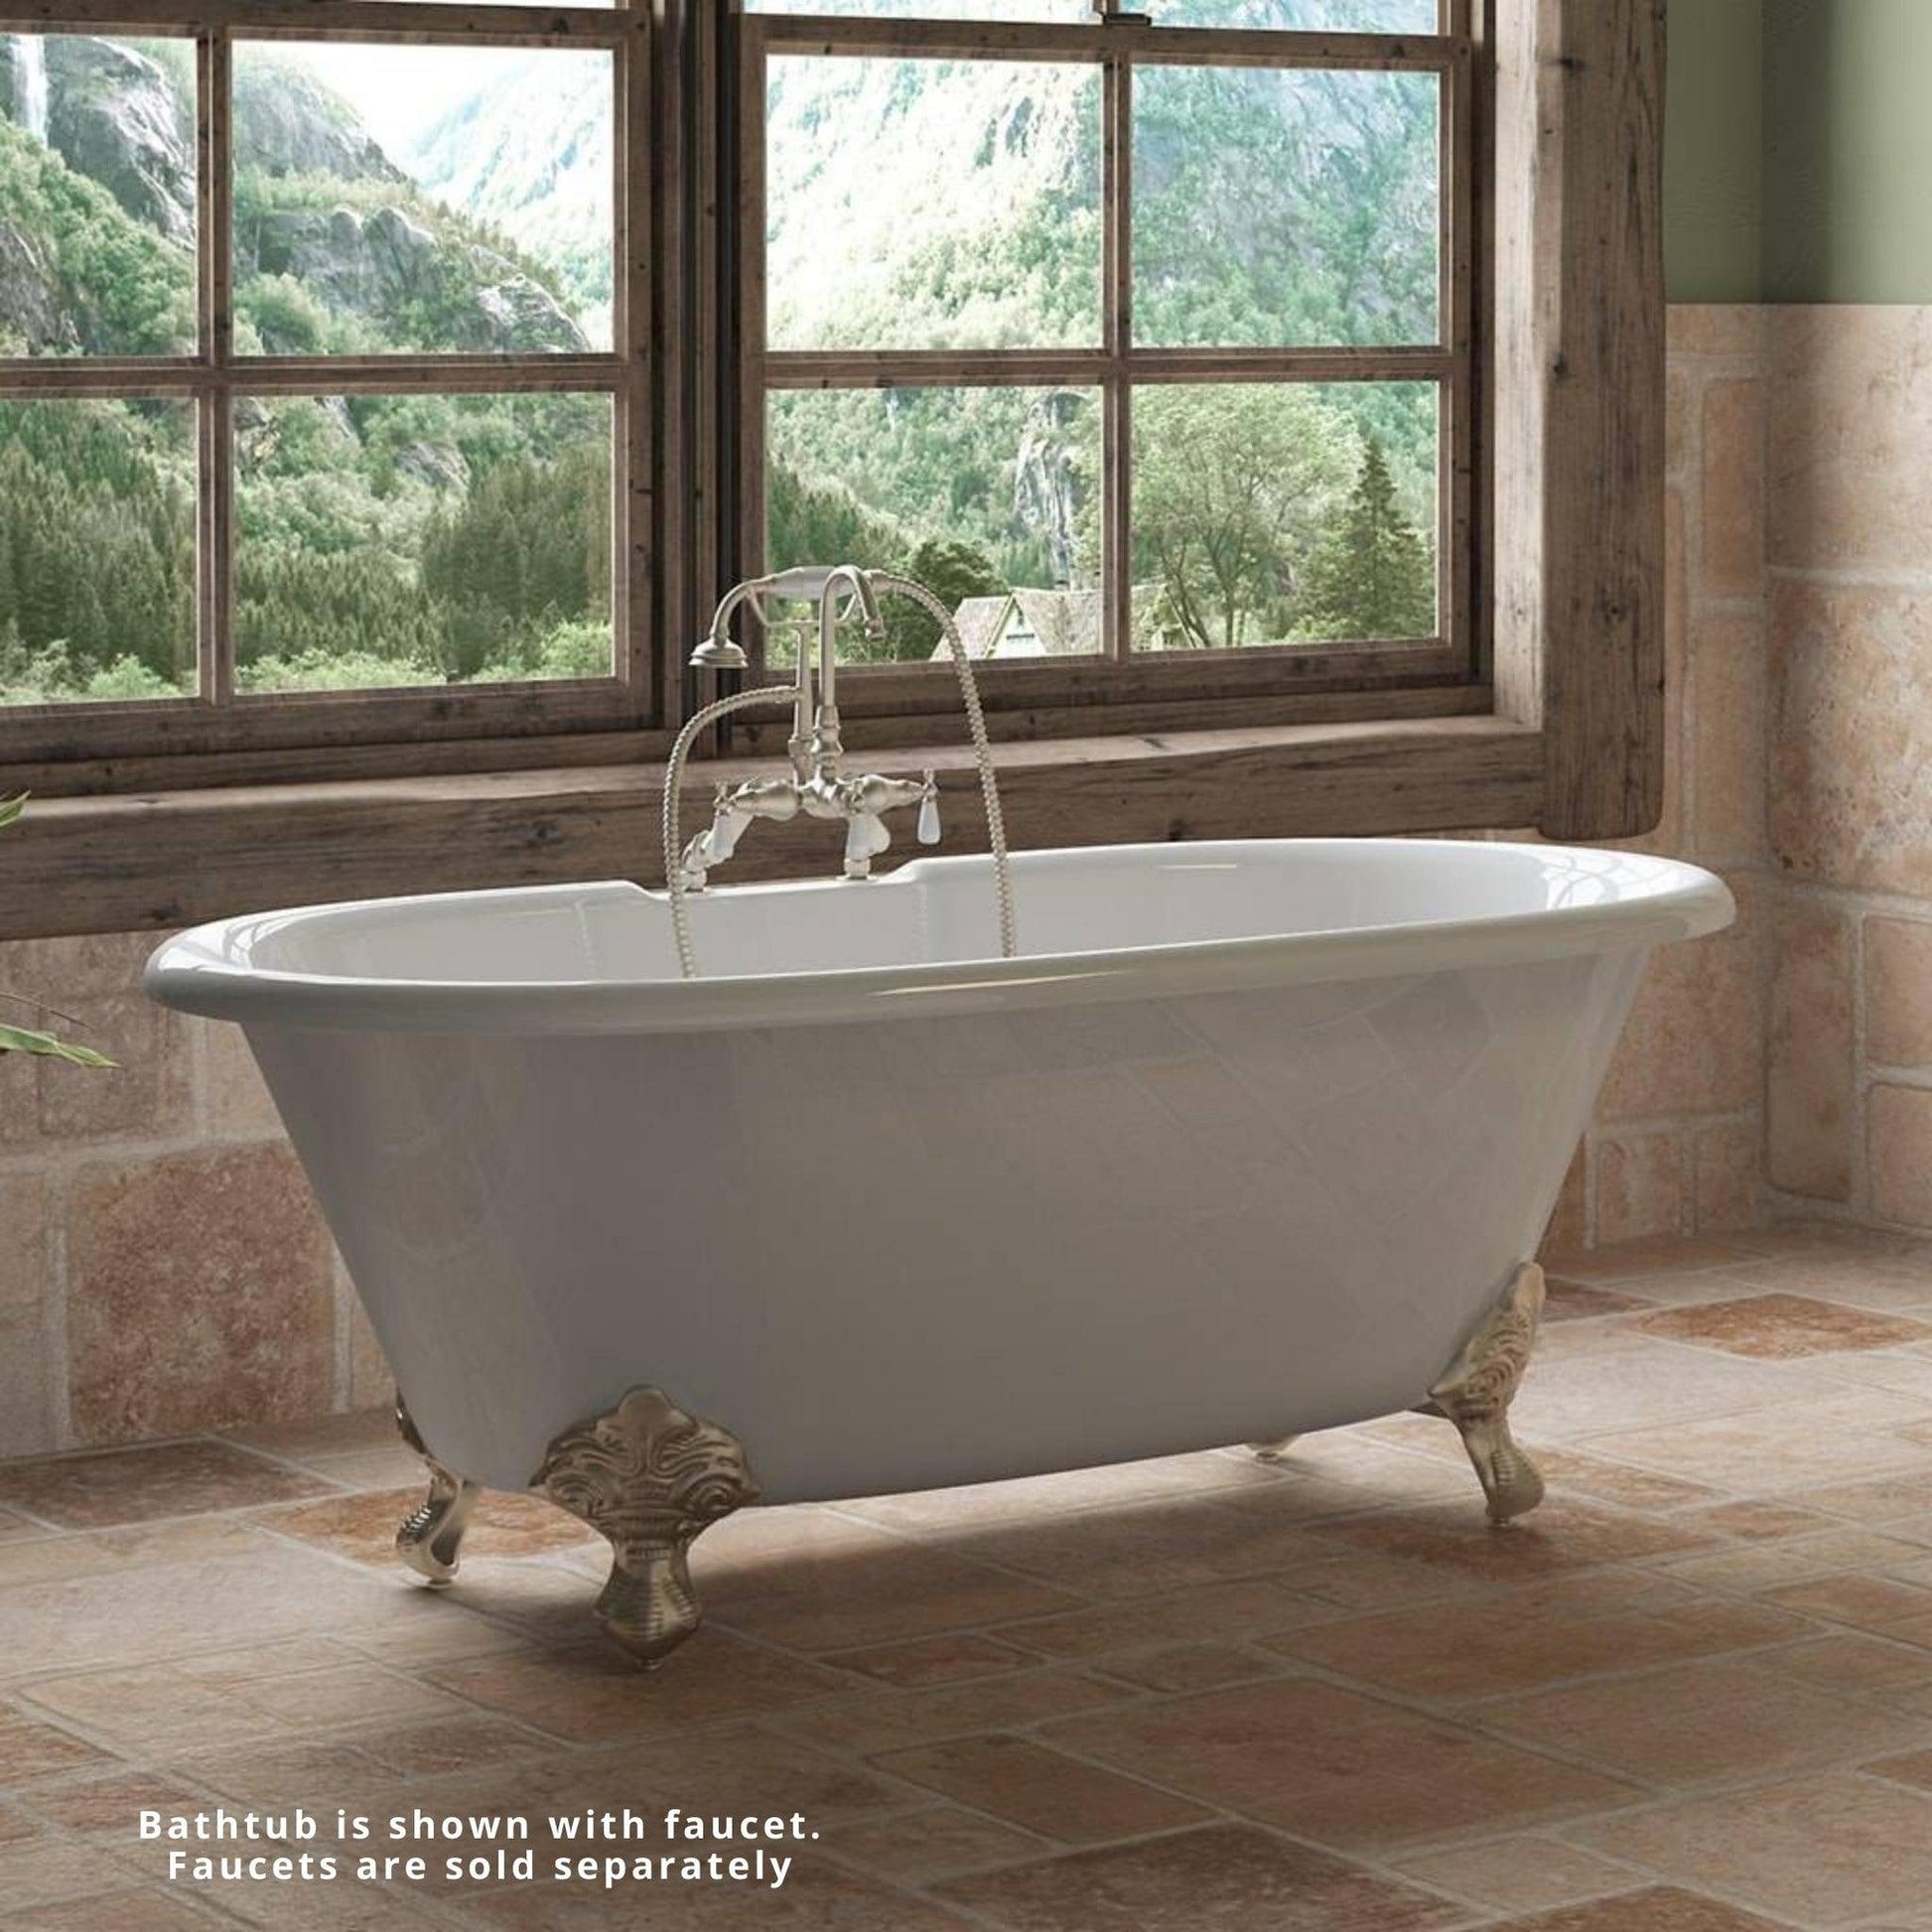 Cambridge Plumbing 60" White Cast Iron Double Ended Bathtub With Deck Holes With Brushed Nickel Feet